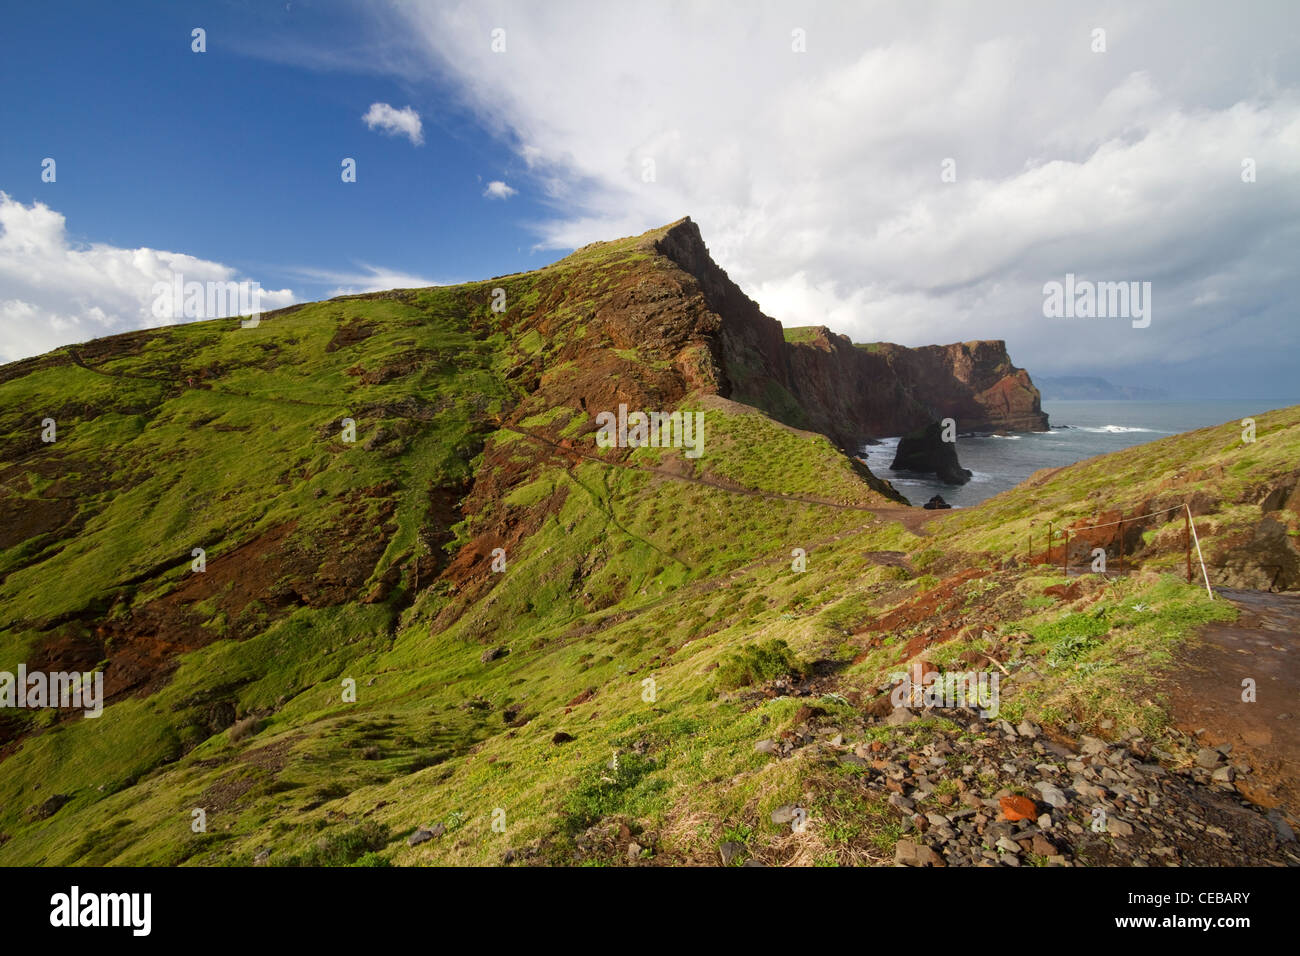 Dramatic landscape on the island of Madeira, Portugal. Stock Photo